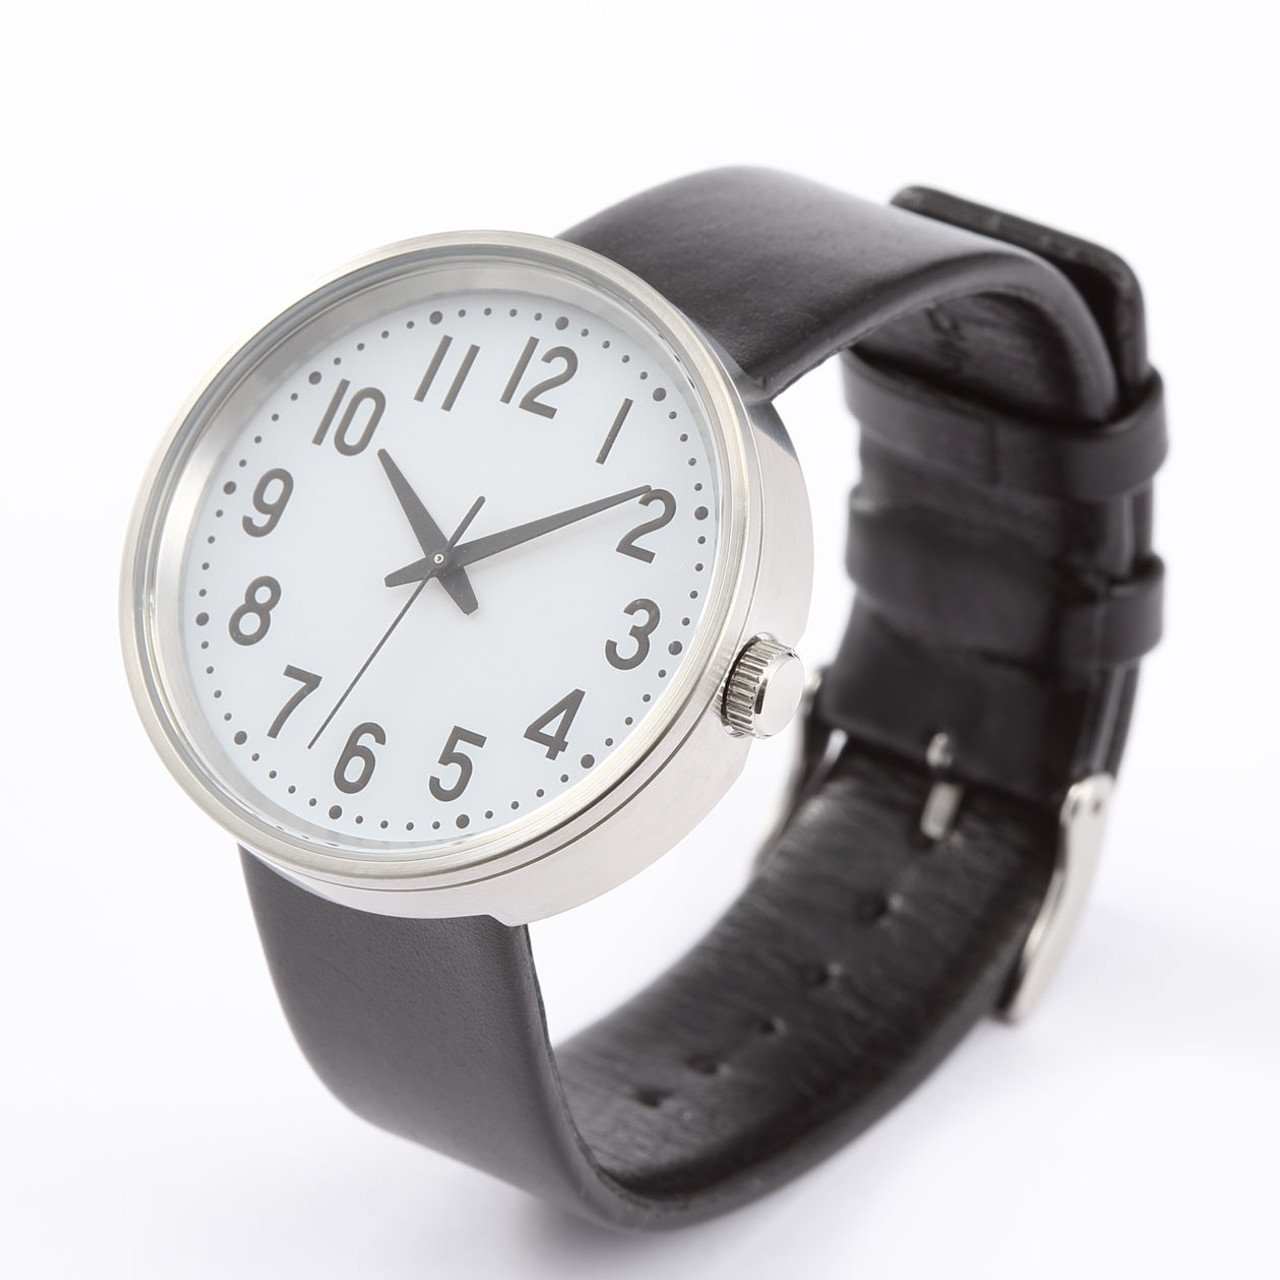 Park Clock Shaped Watch With Leather Band L